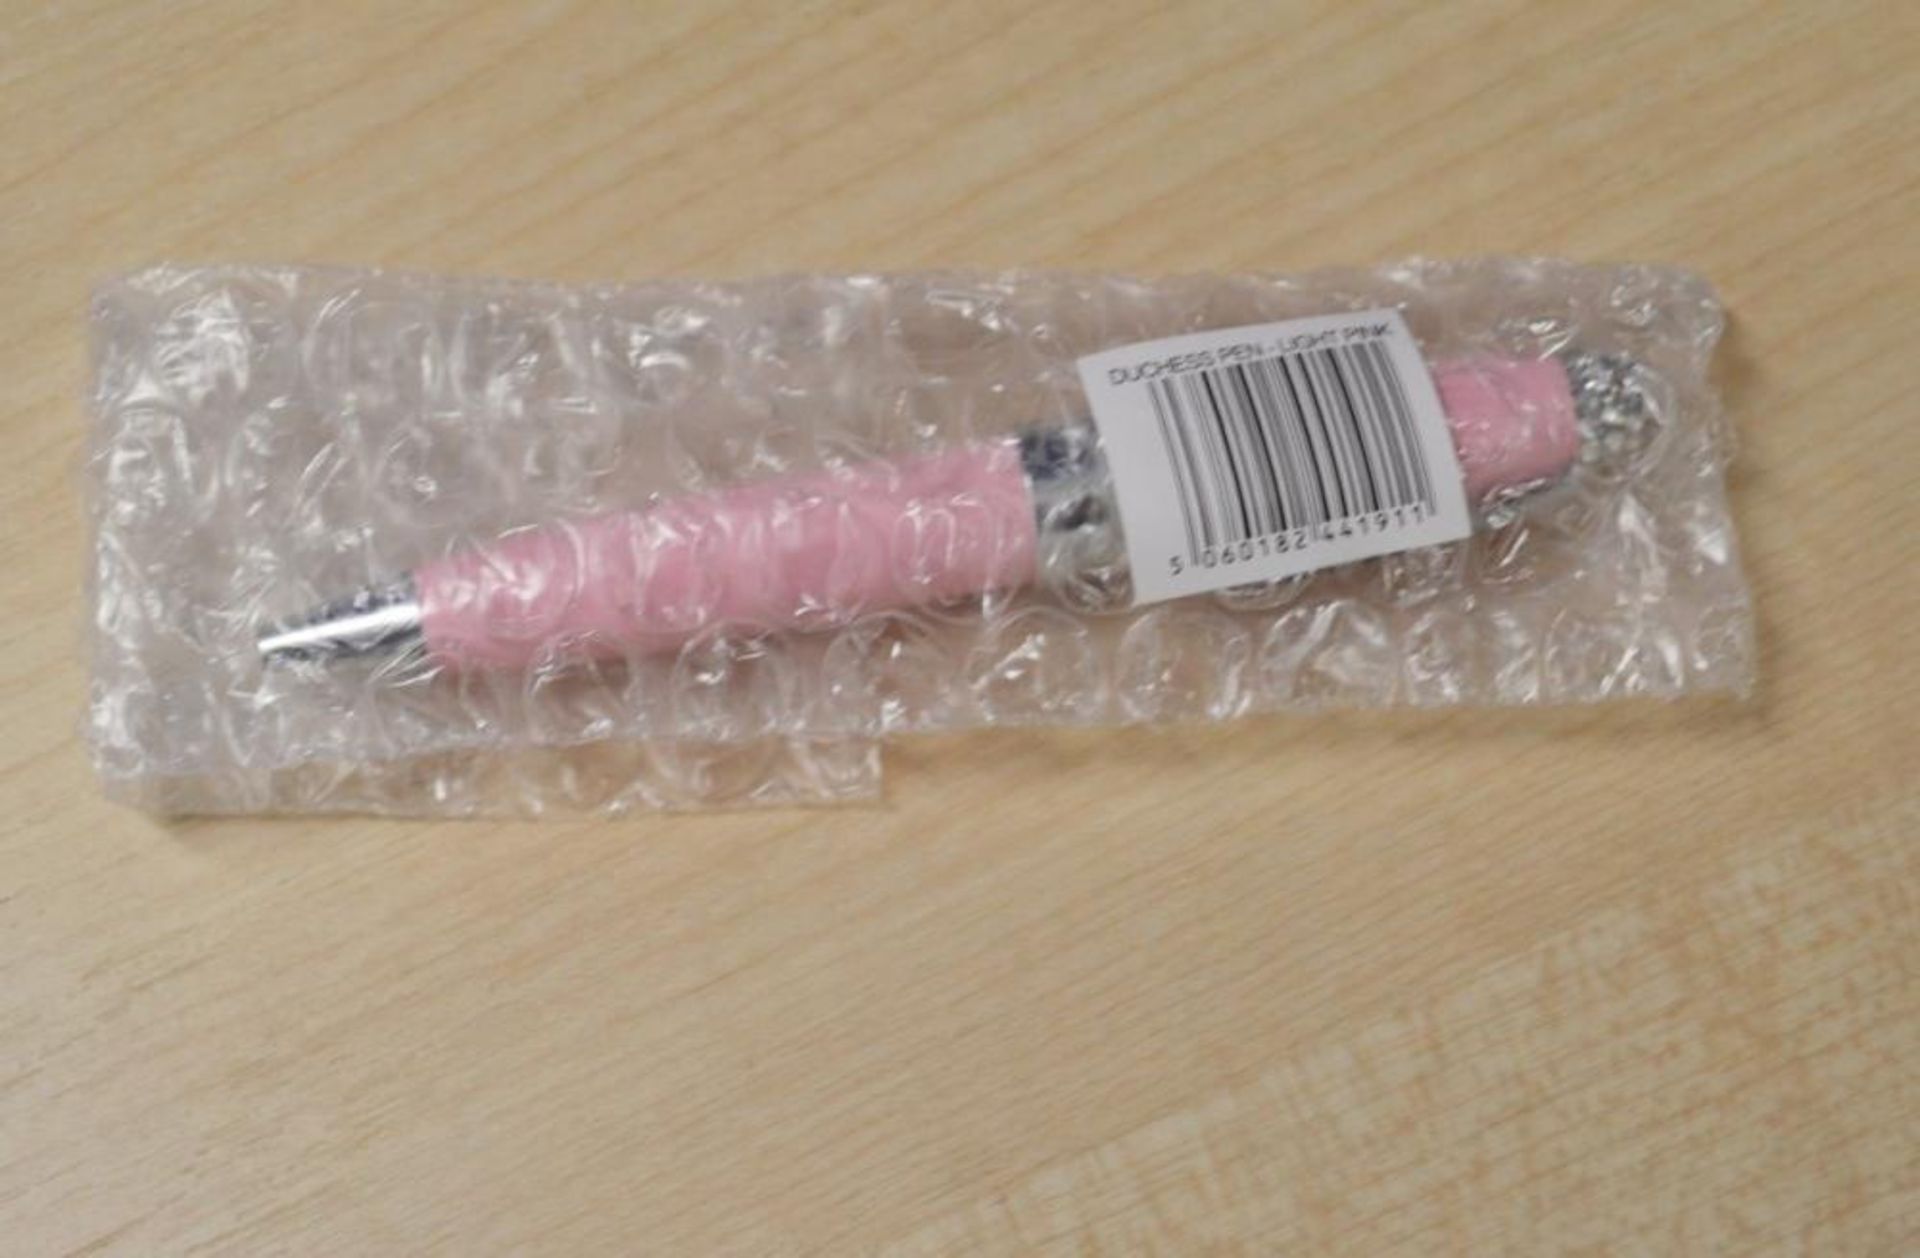 1 x ICE LONDON "Duchess" Ladies Pen Embellished With SWAROVSKI Crystals - Colour: Light Pink - Brand - Image 3 of 3